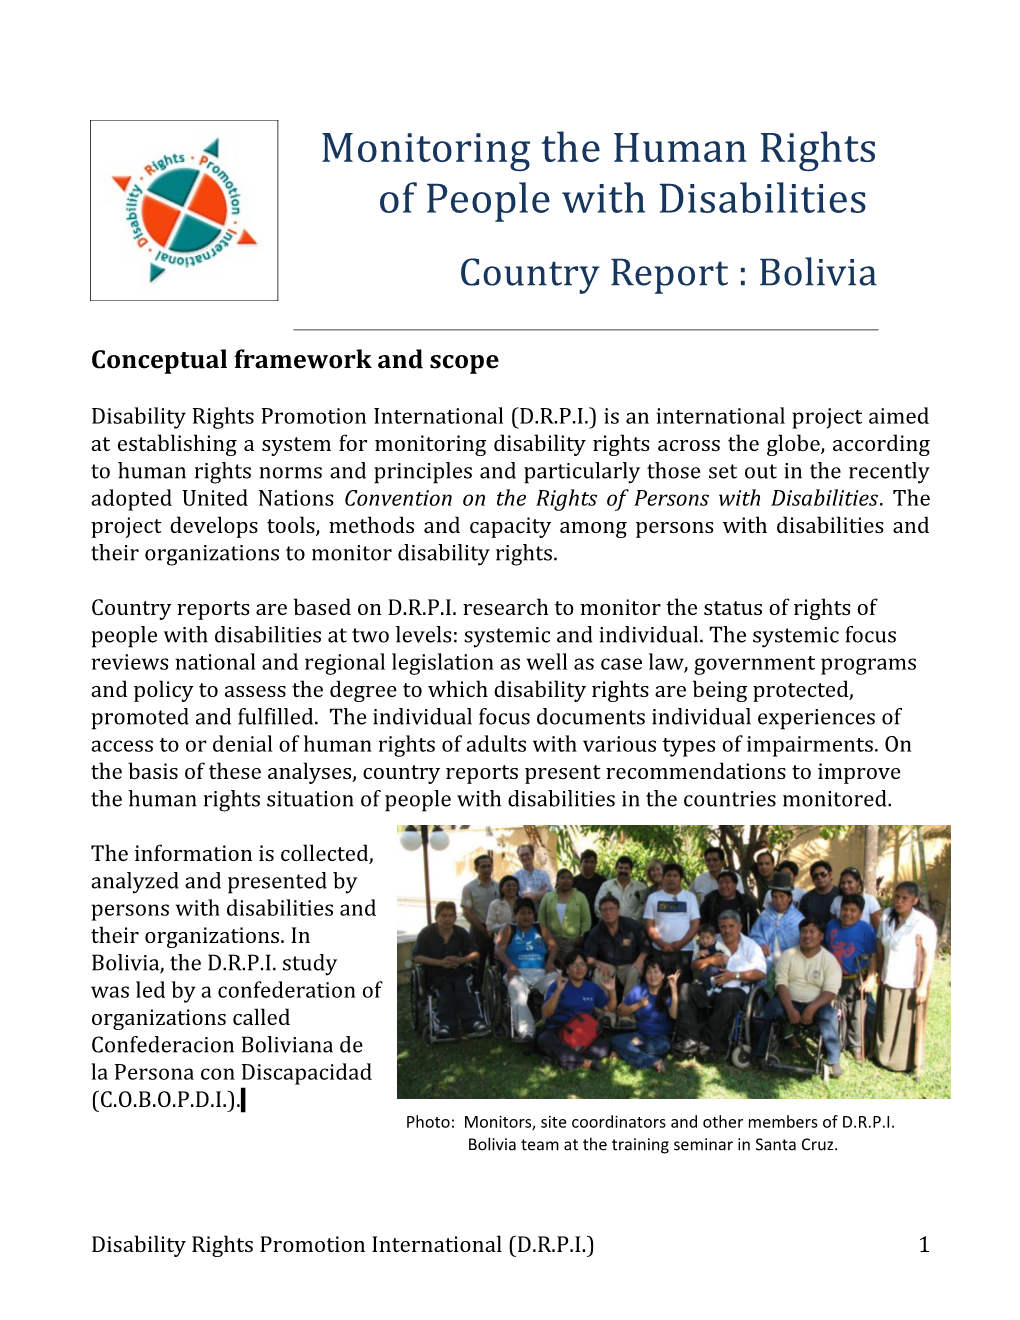 Disability Rights Promotion International